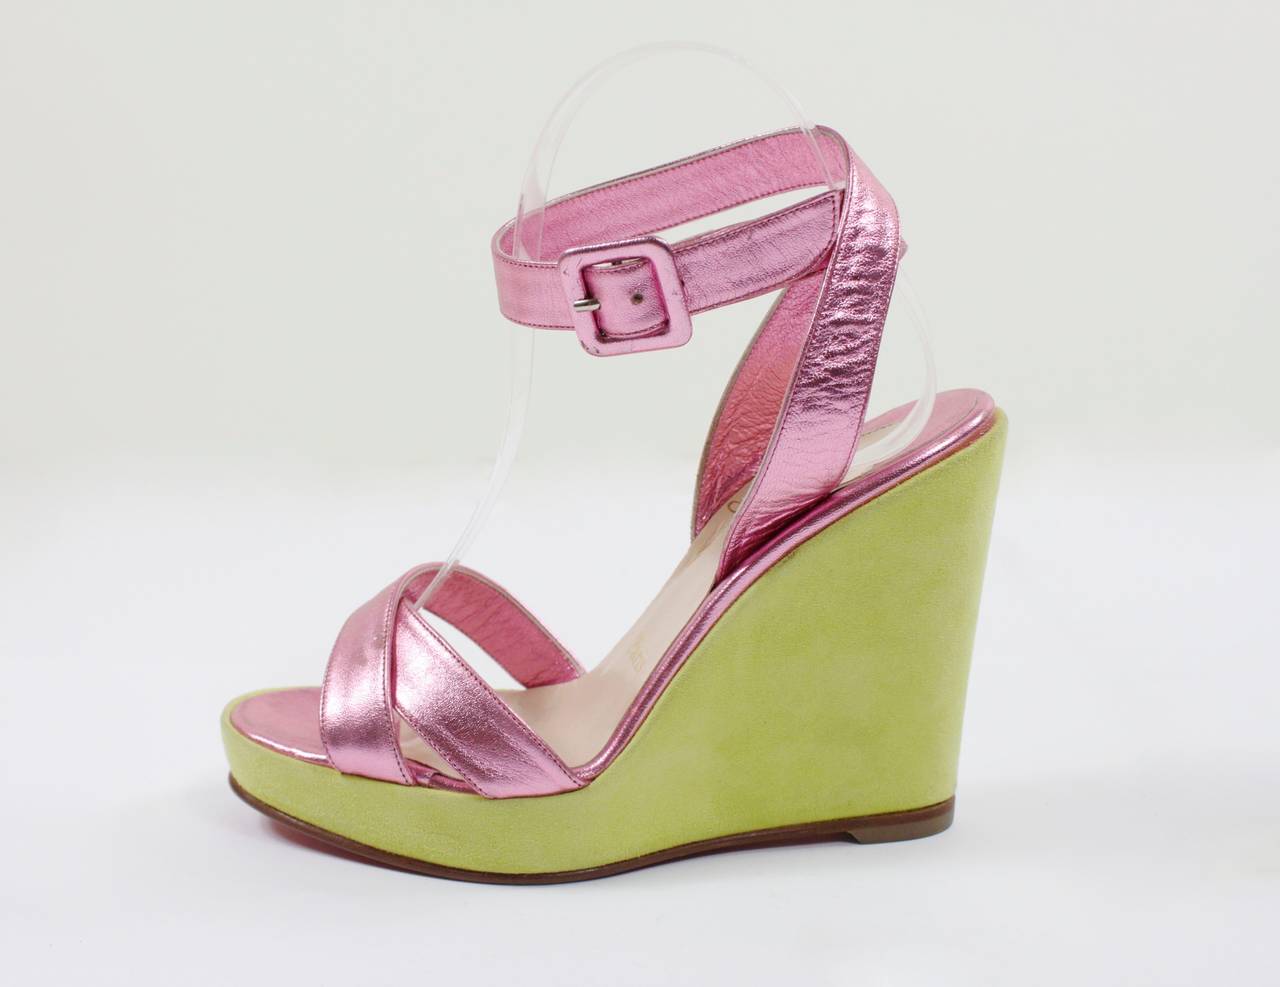 Blush pink metallic leather straps complement the electric lime green heel on these fabulous Christian Louboutin wedges. 

4.5 inch heel
Size 37.5